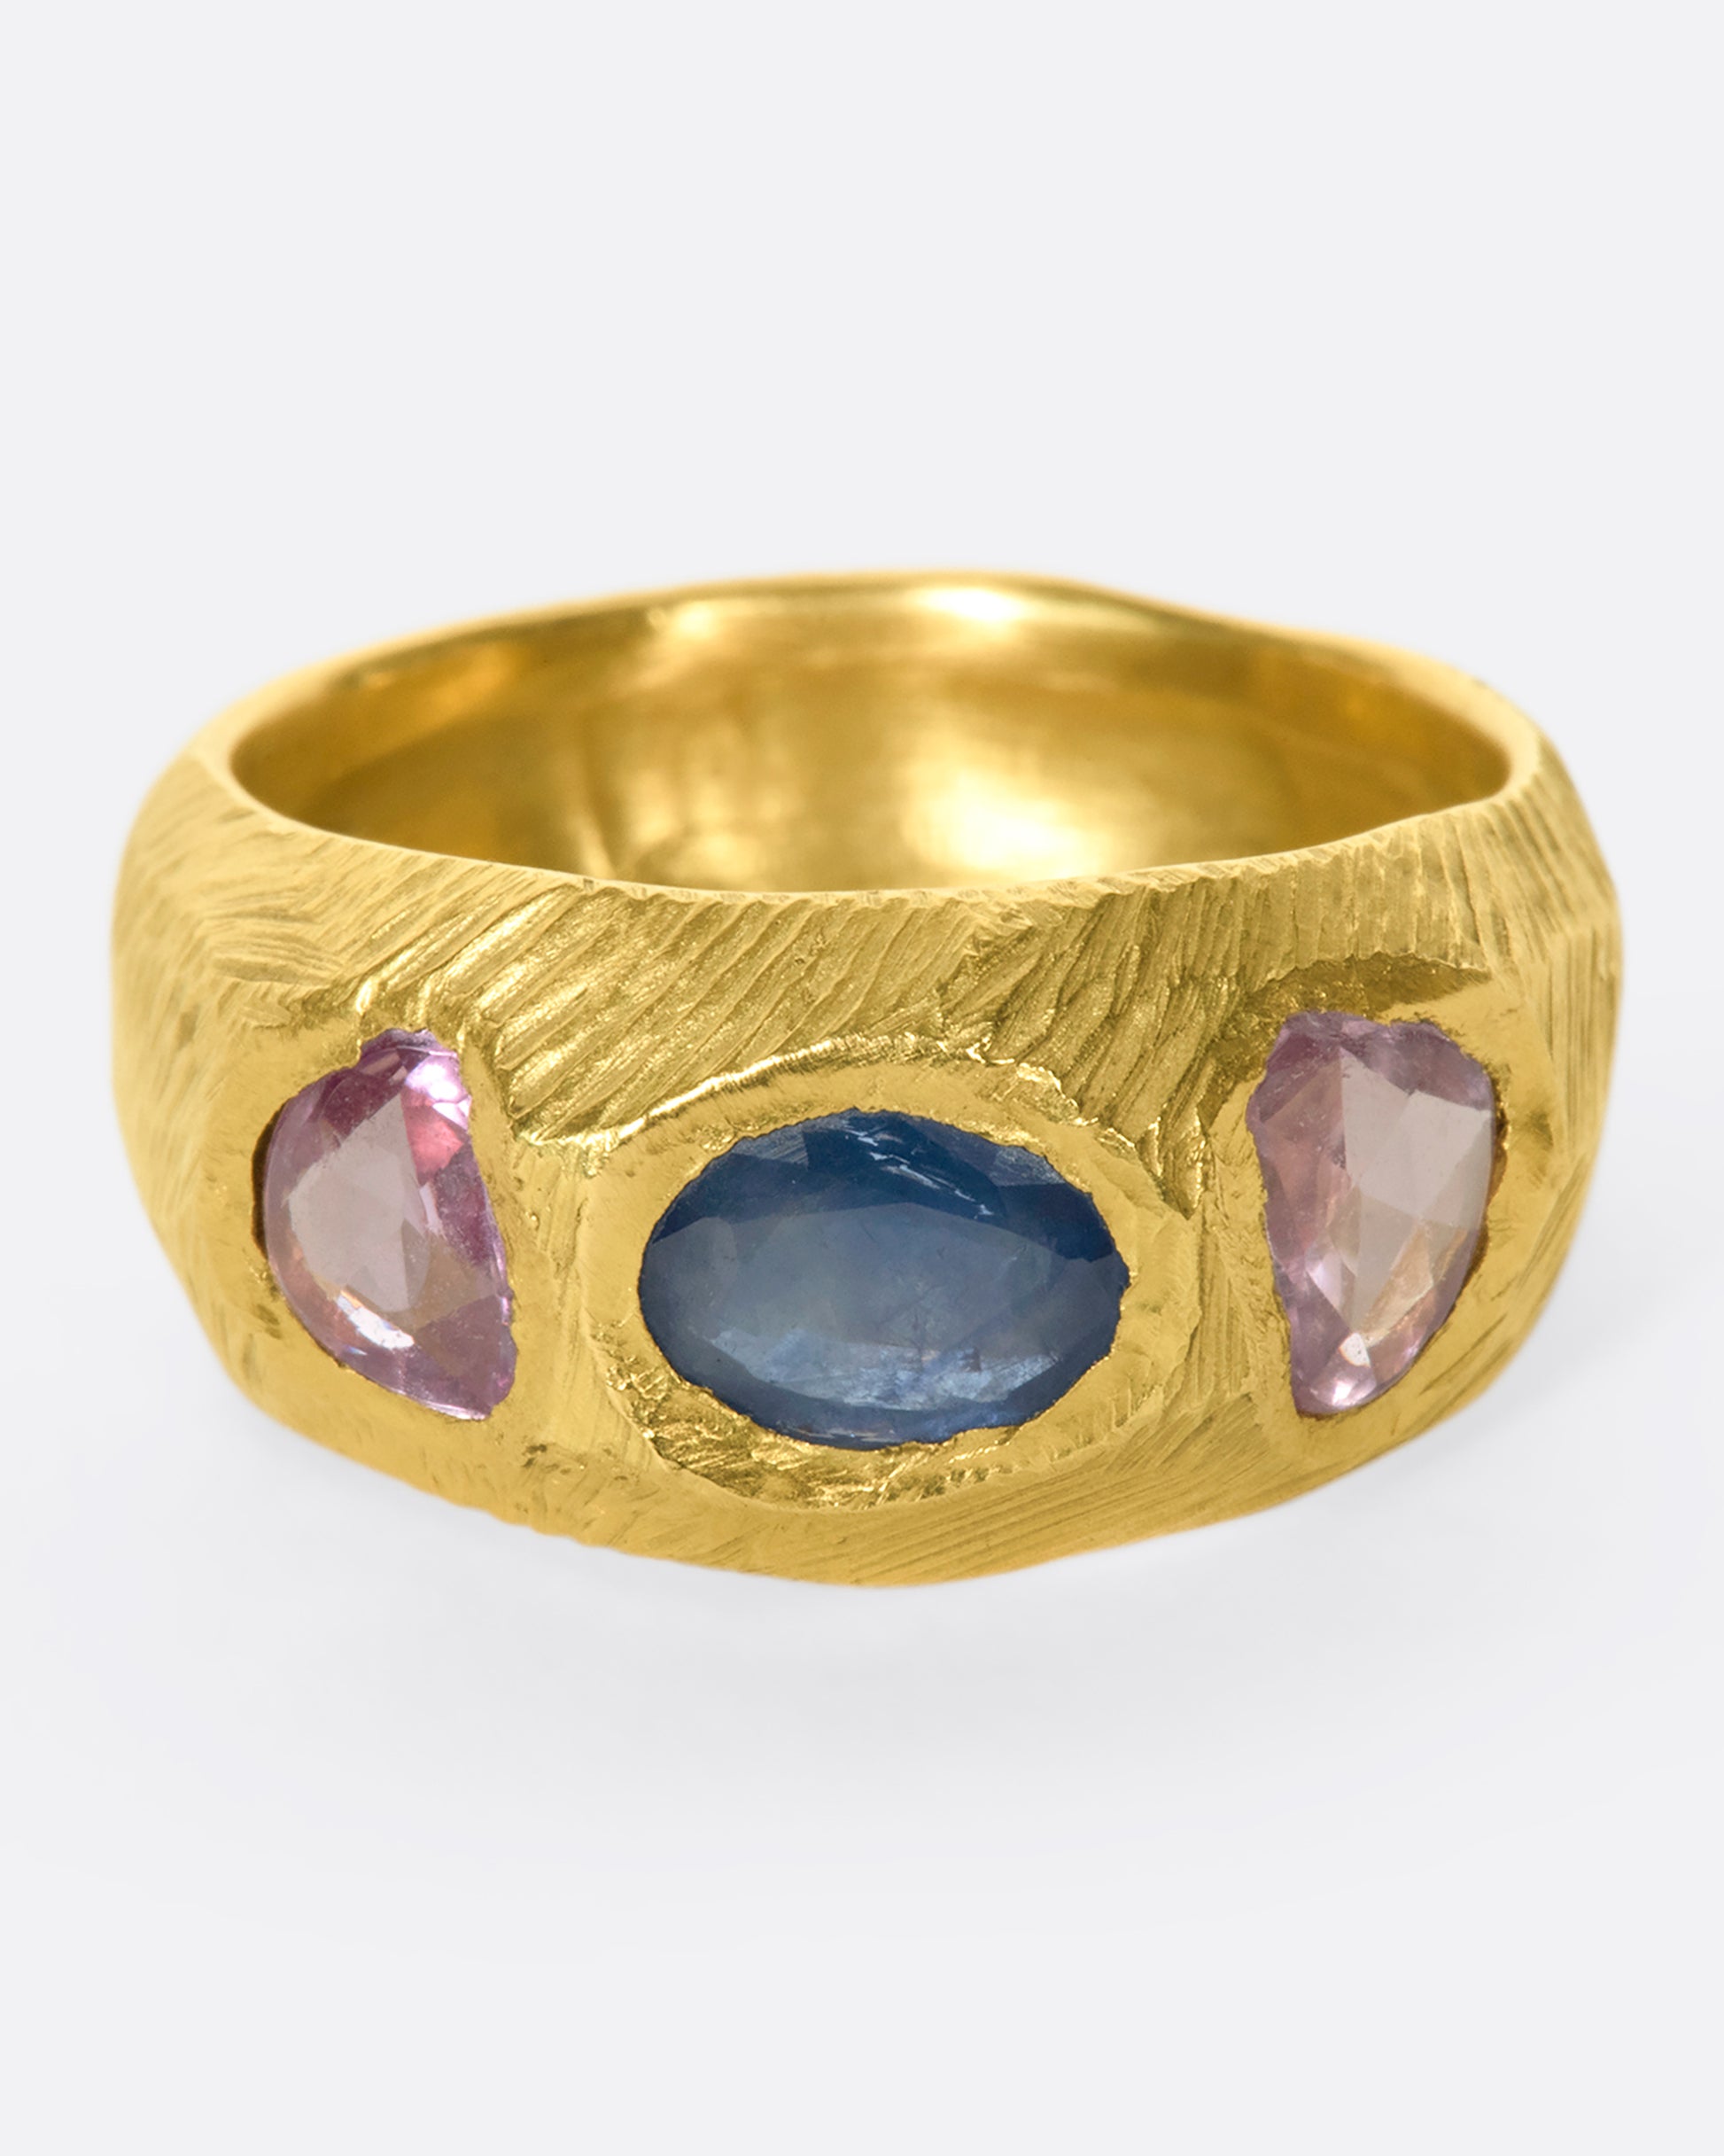 This hand carved 18k gold band is inlaid with an oval blue sapphire, flanked by beautiful pink sapphires